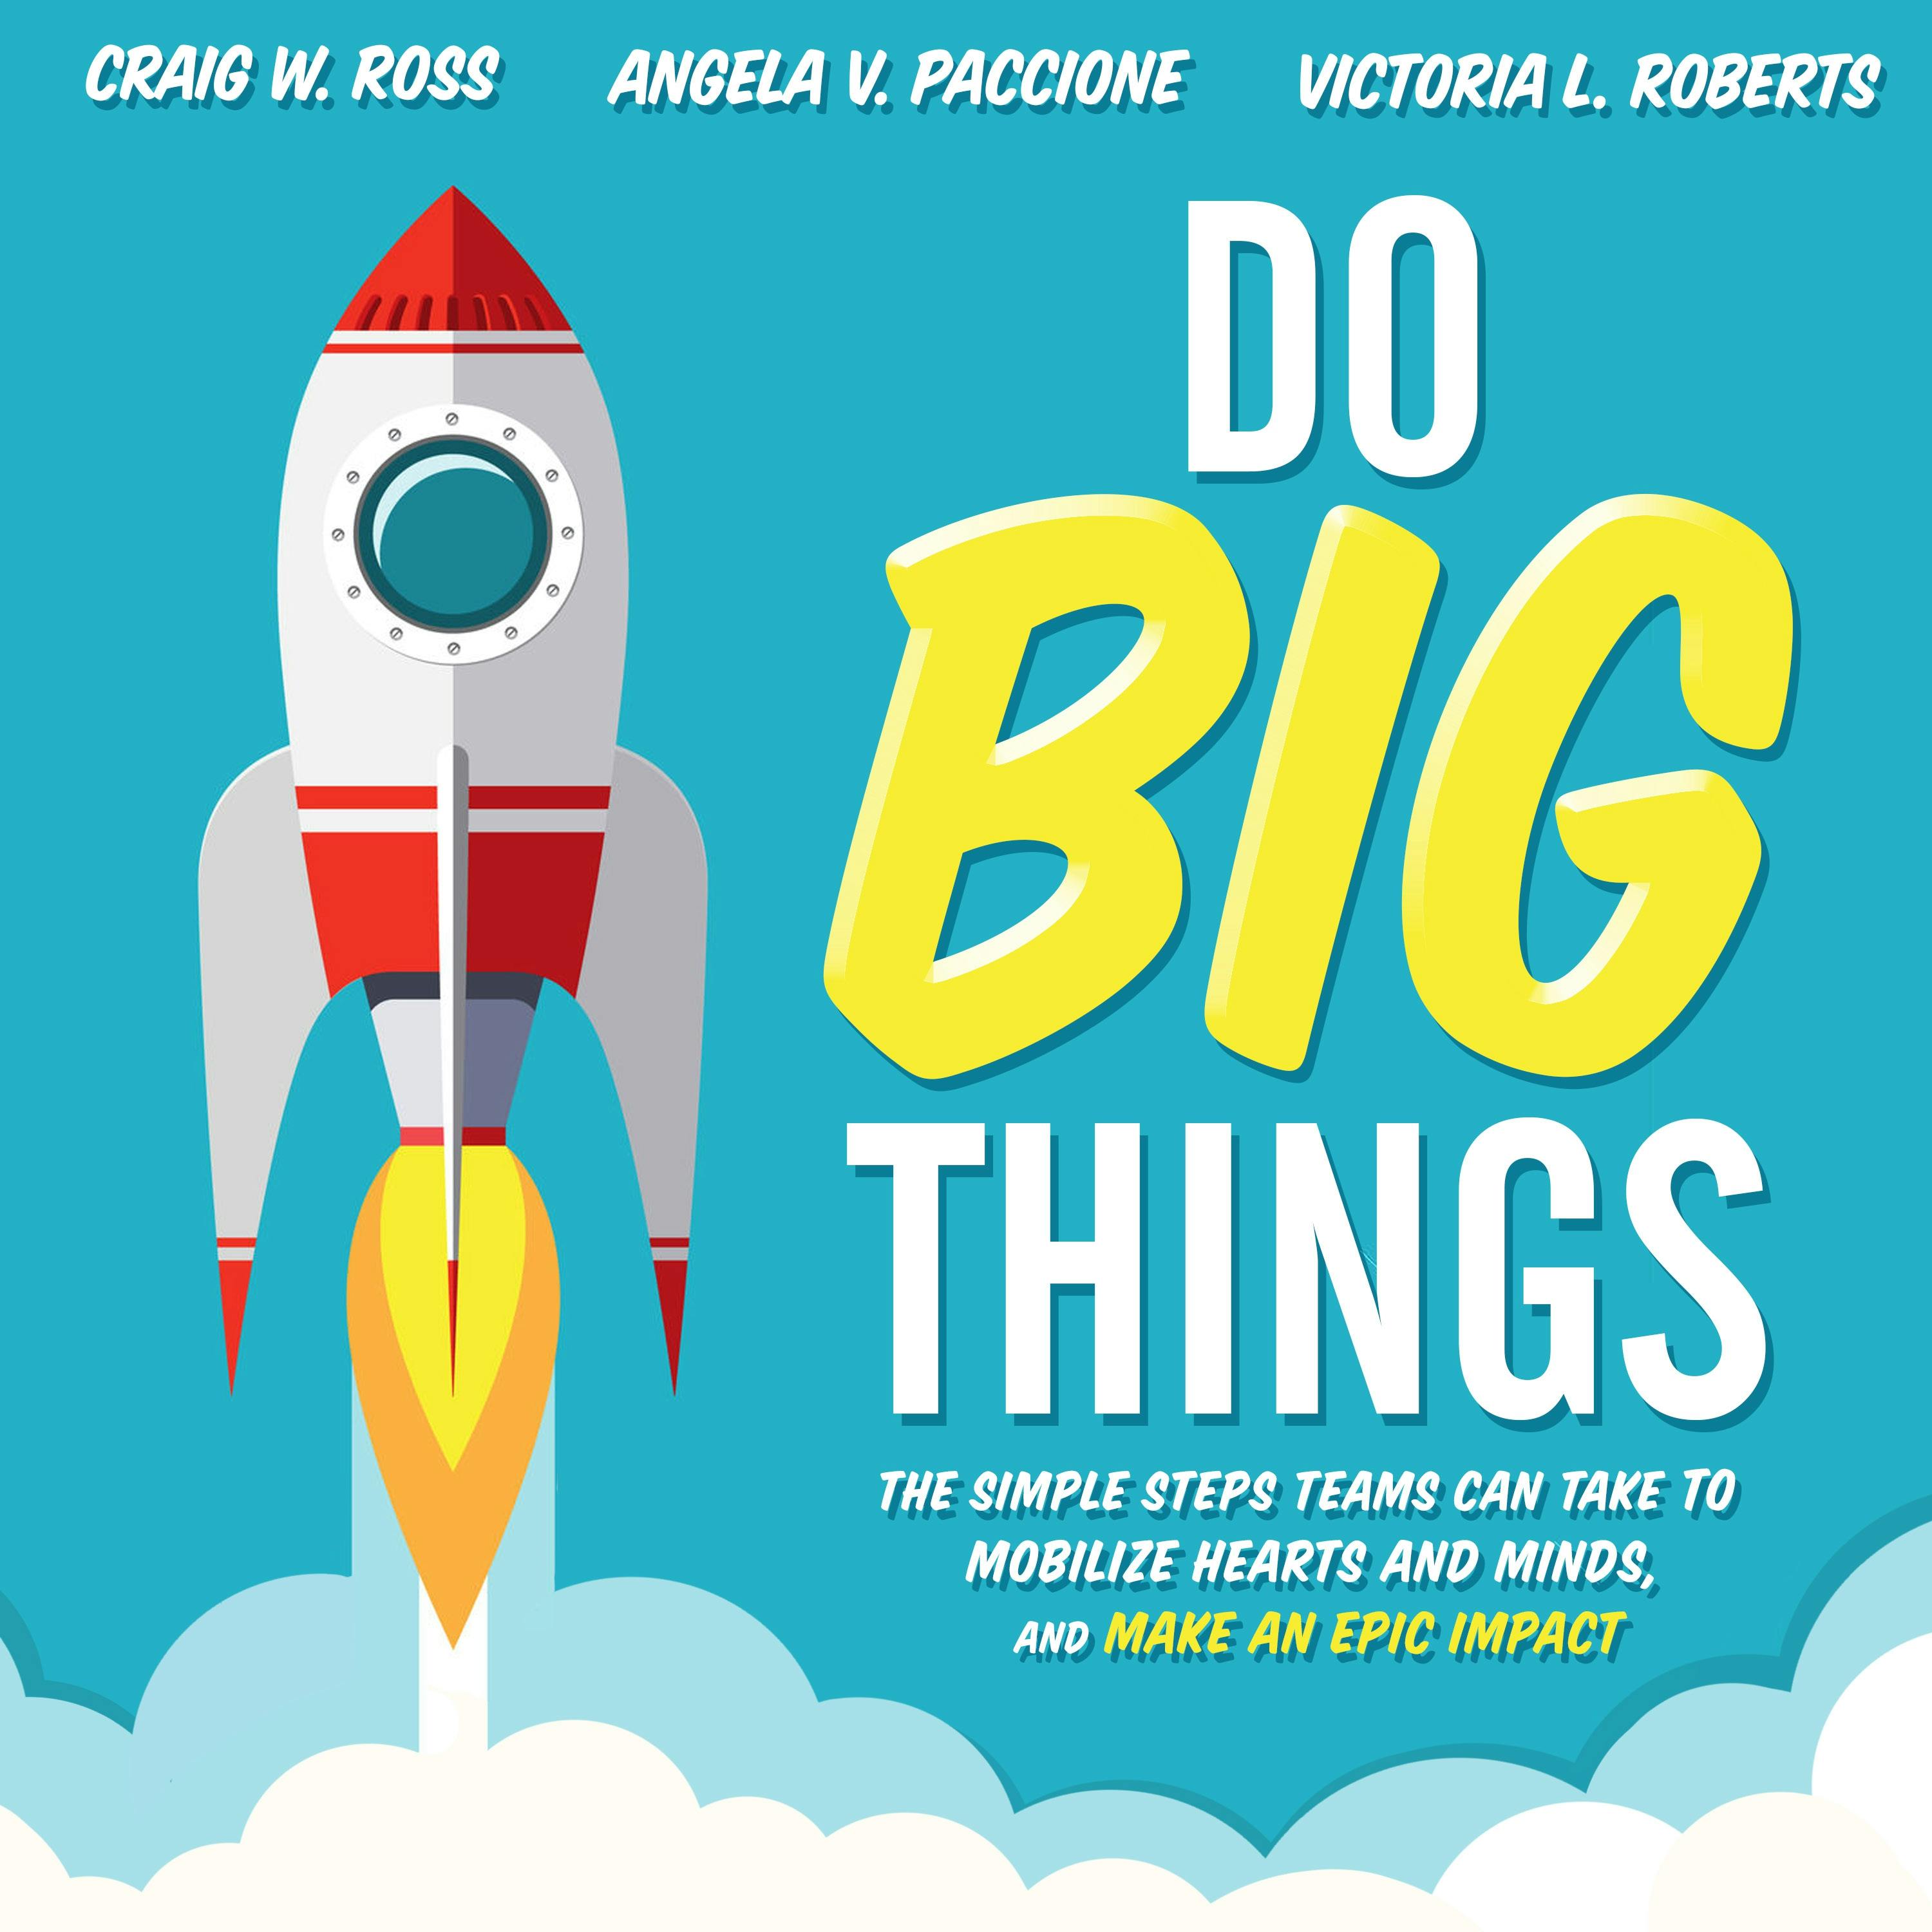 Do Big Things: The Simple Steps Teams Can Take to Mobilize Hearts and Minds, and Make an Epic Impact - Angela V. Paccione, Craig W. Ross, Victoria L. Roberts